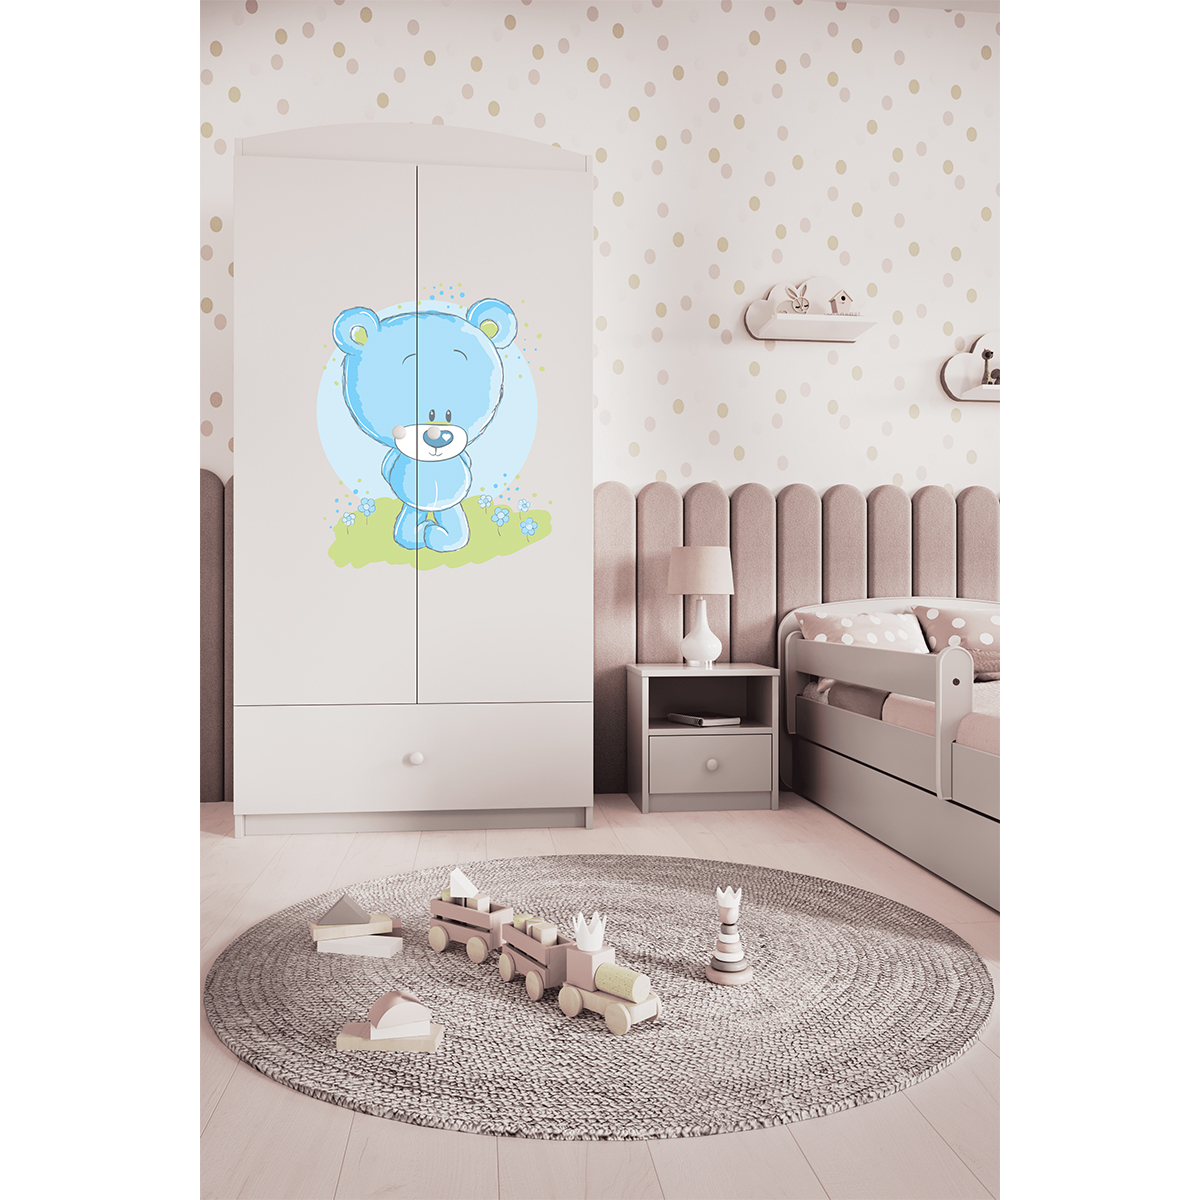 kocot_babydream_ours_armoire_ambiance_02